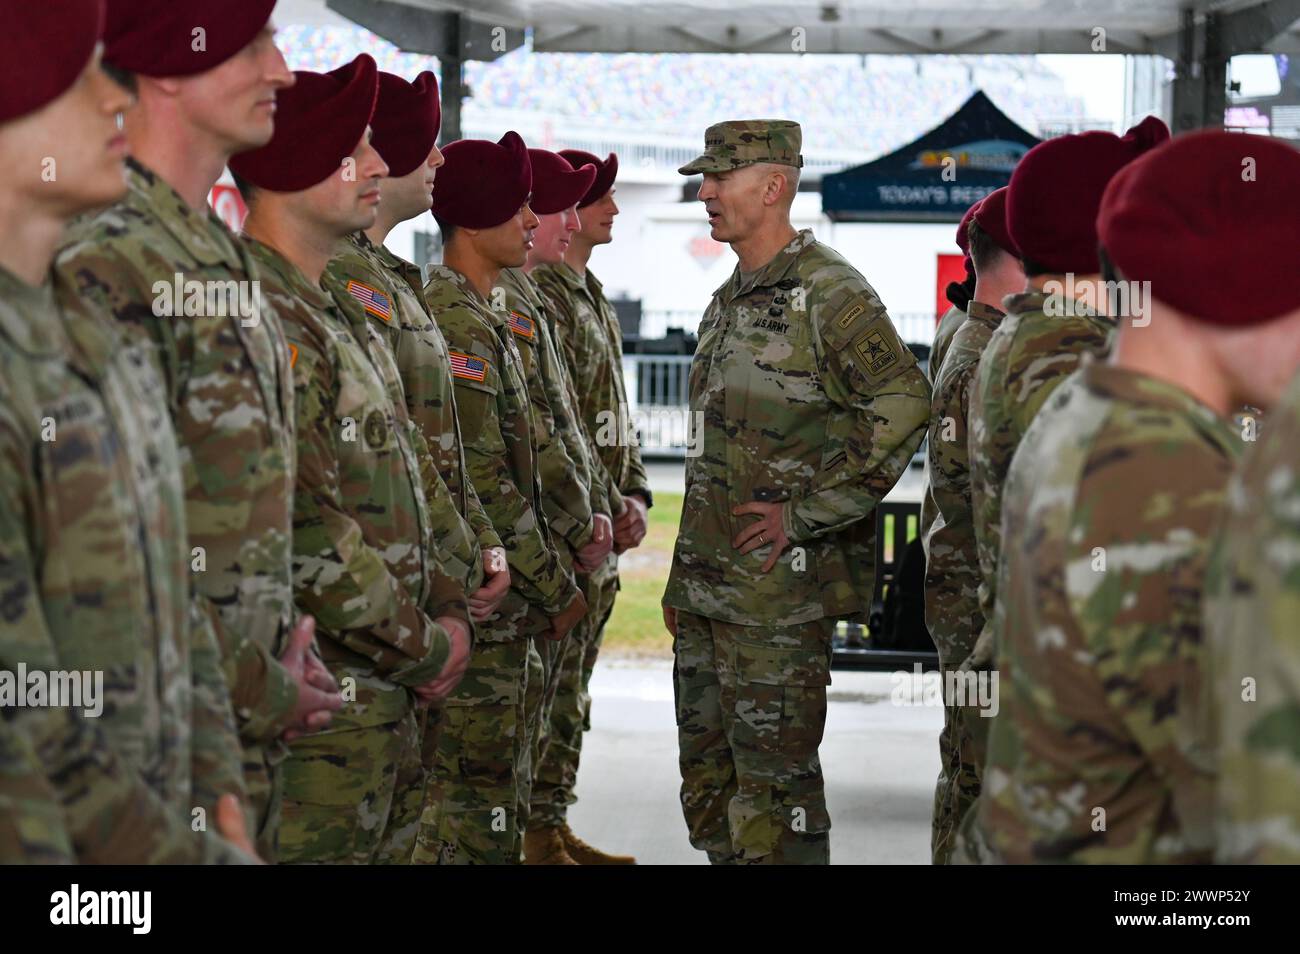 General Randy George, Chief of Staff of the Army, greets paratroopers from the U.S. Army 82nd Airborne Division 2nd Battalion, 505th Infantry Regiment during the 2024 NASCAR Daytona 500 in Daytona Beach, Fla., Sunday, Feb. 18, 2024. The Daytona 500 is a 500-mile-long NASCAR Cup Series motor race held annually and is regarded as the most important and prestigious race on the NASCAR calendar. Stock Photo